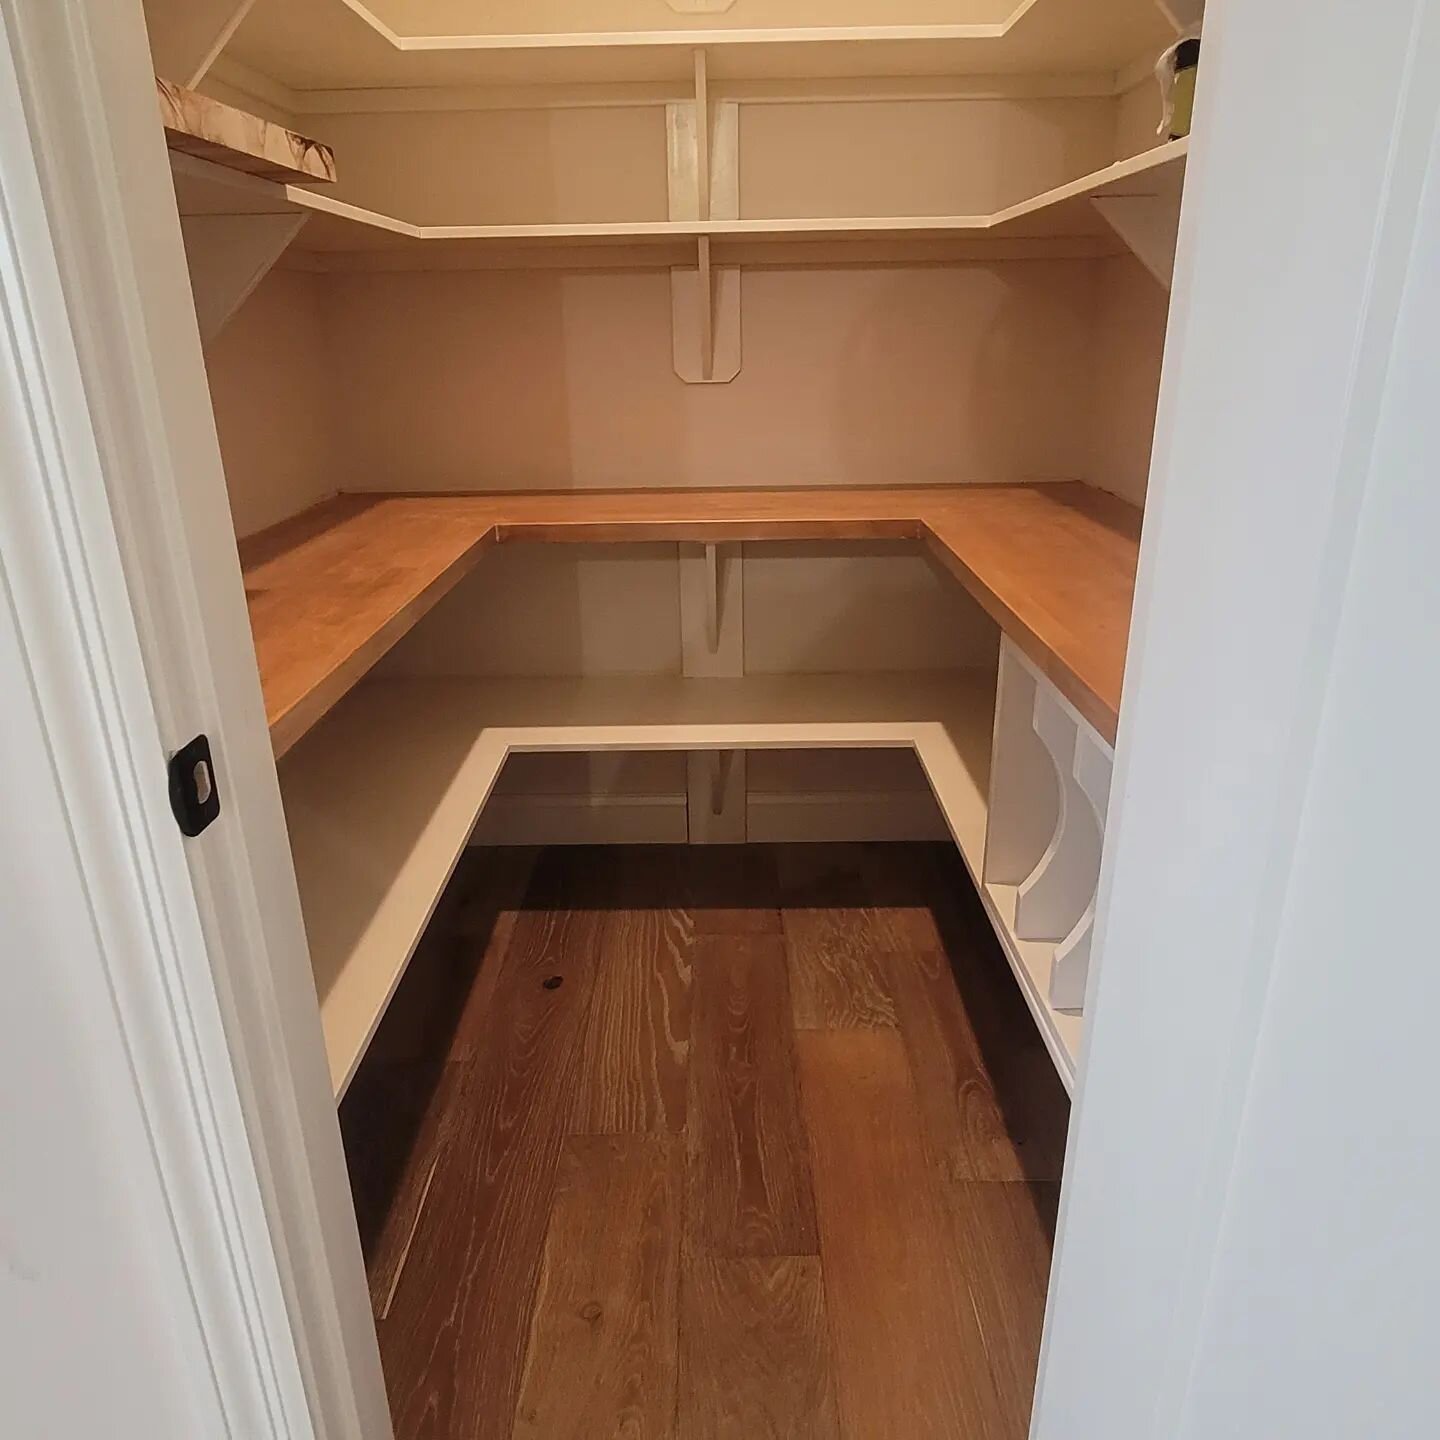 One of this week's projects was to paint the shelves and stain the maple butcher's block in this walk-in pantry. This customer had the wire shelves replaced with wood and added the butcher's block. The shelve's color is &quot;Alabaster&quot; in Miles